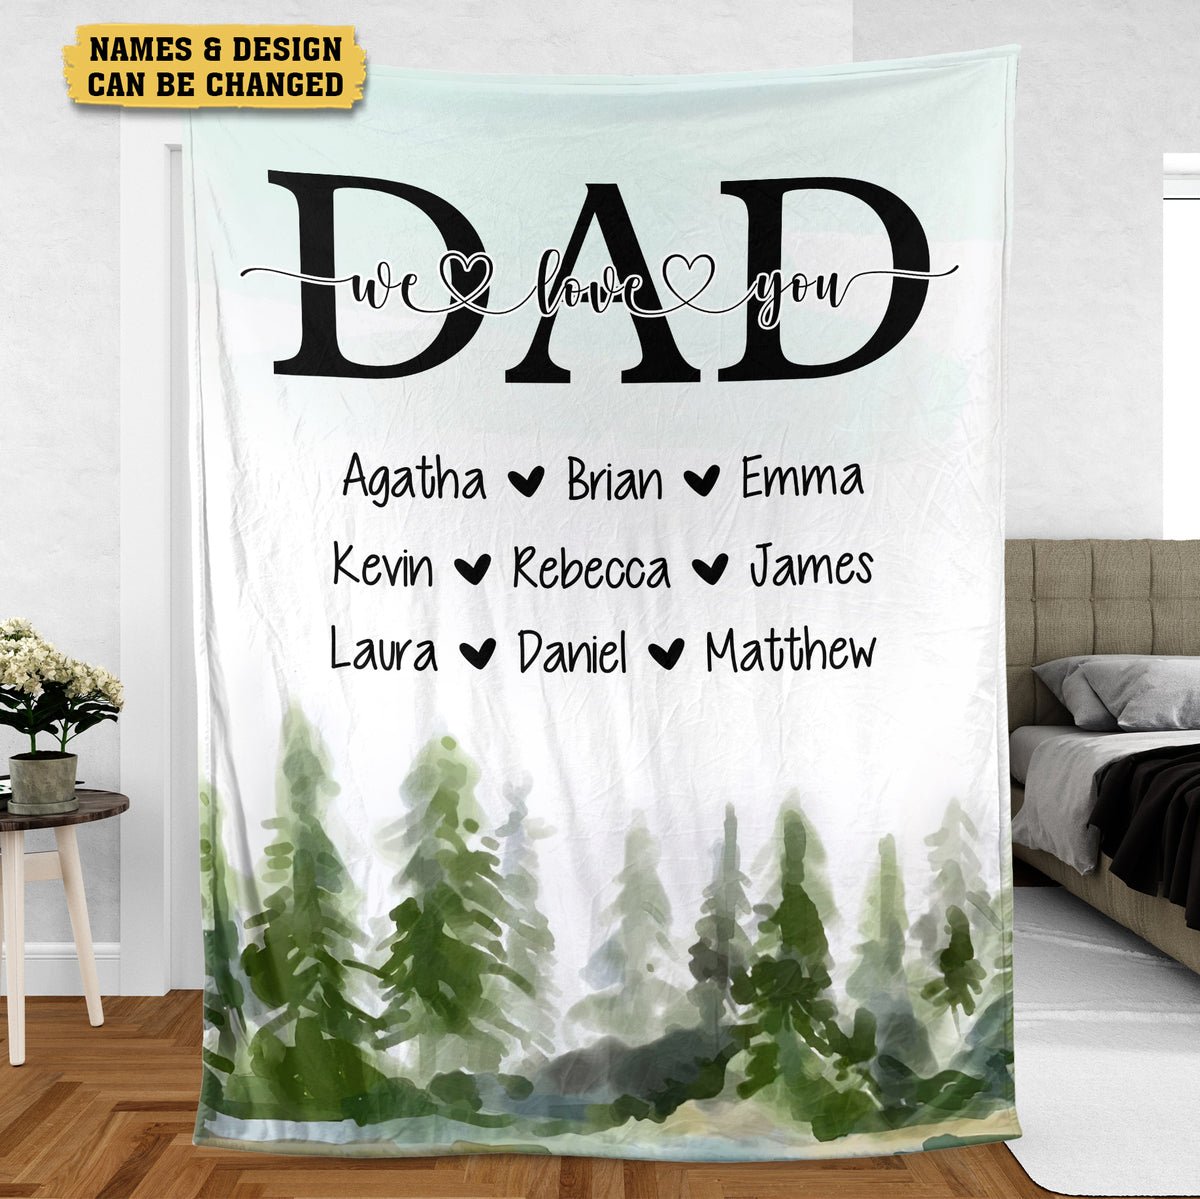 Dad/ Grandpa We Love You - Personalized Blanket - Best Gift For Father